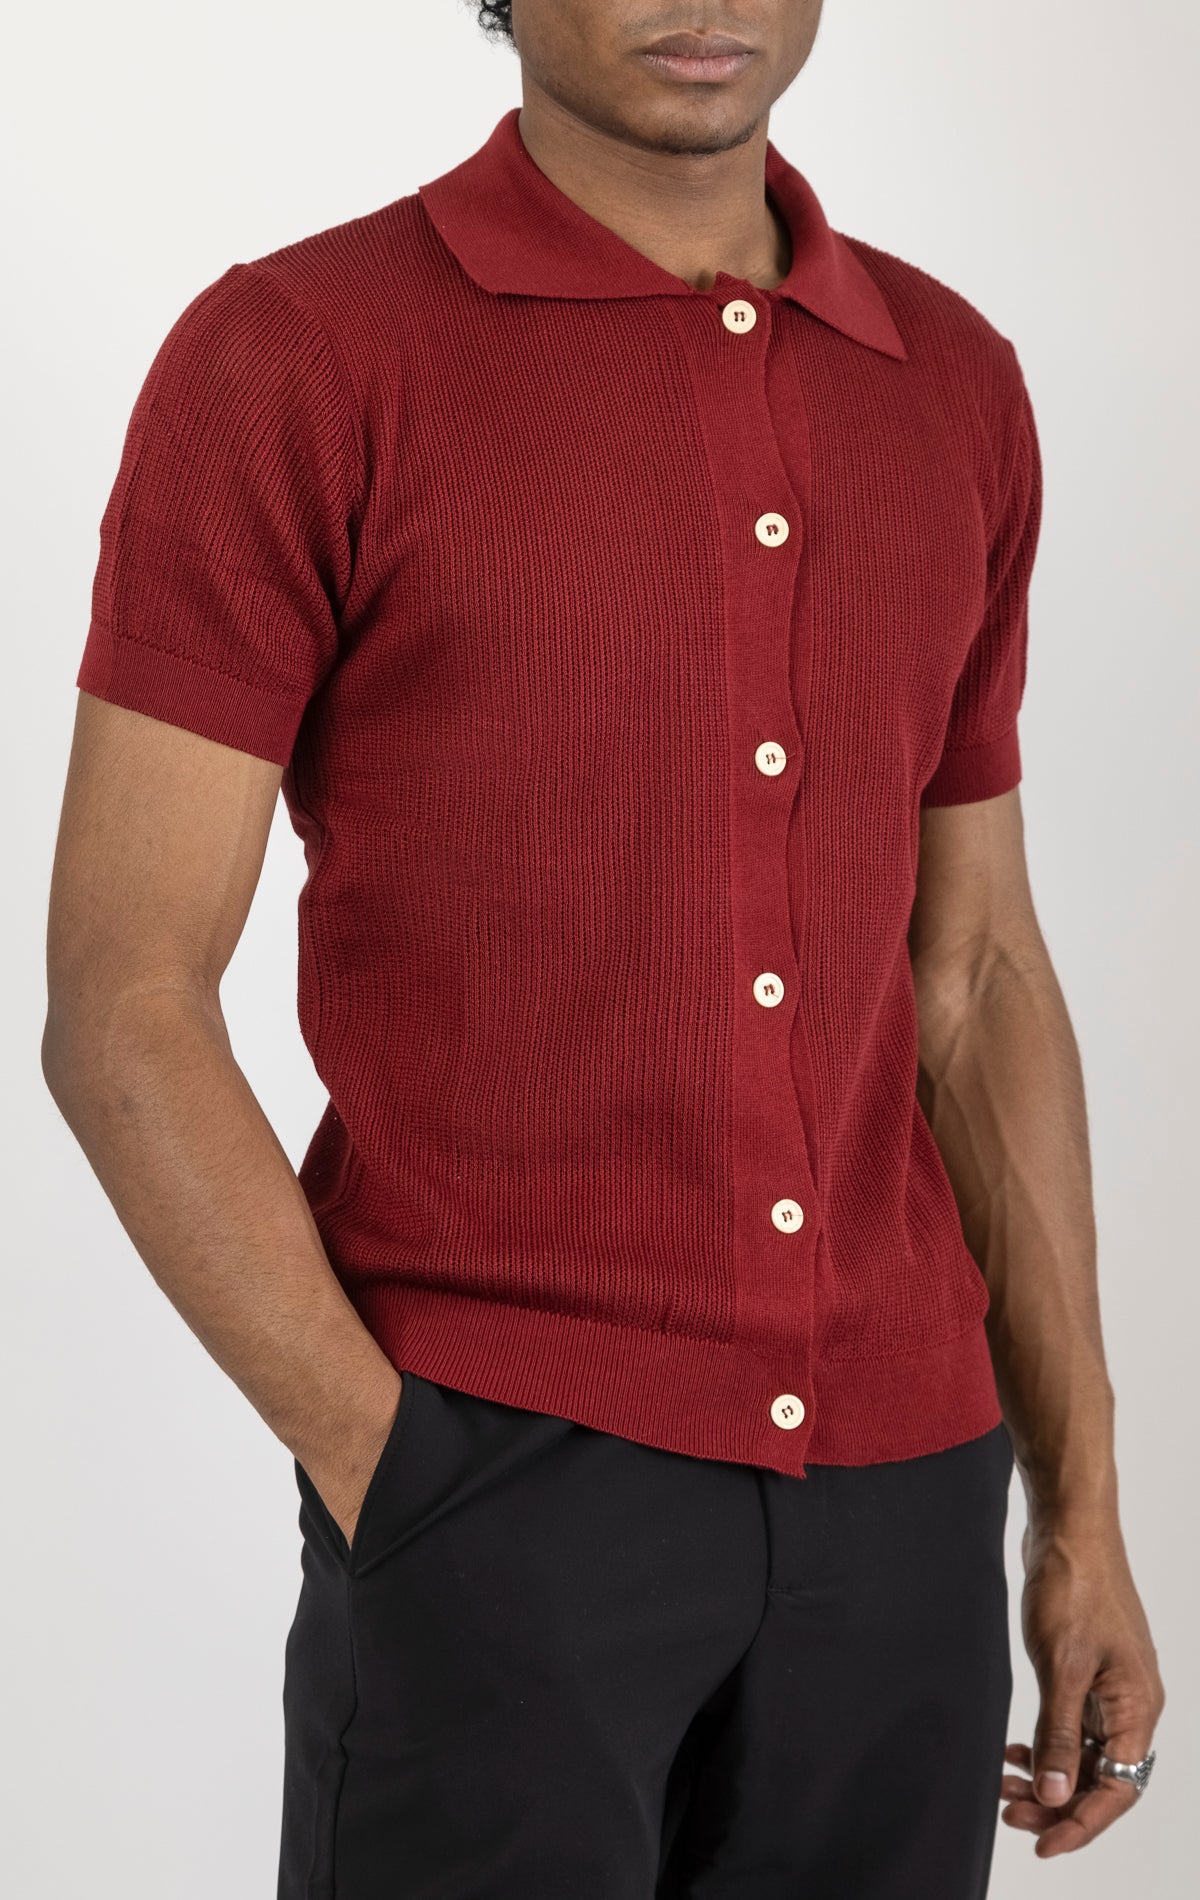 Men's see-through button-down mesh top in burgundy. The top is made from a 50% cotton, 50% acrylic blend and features a tailored fit with a sheer mesh fabric and button-down closure.